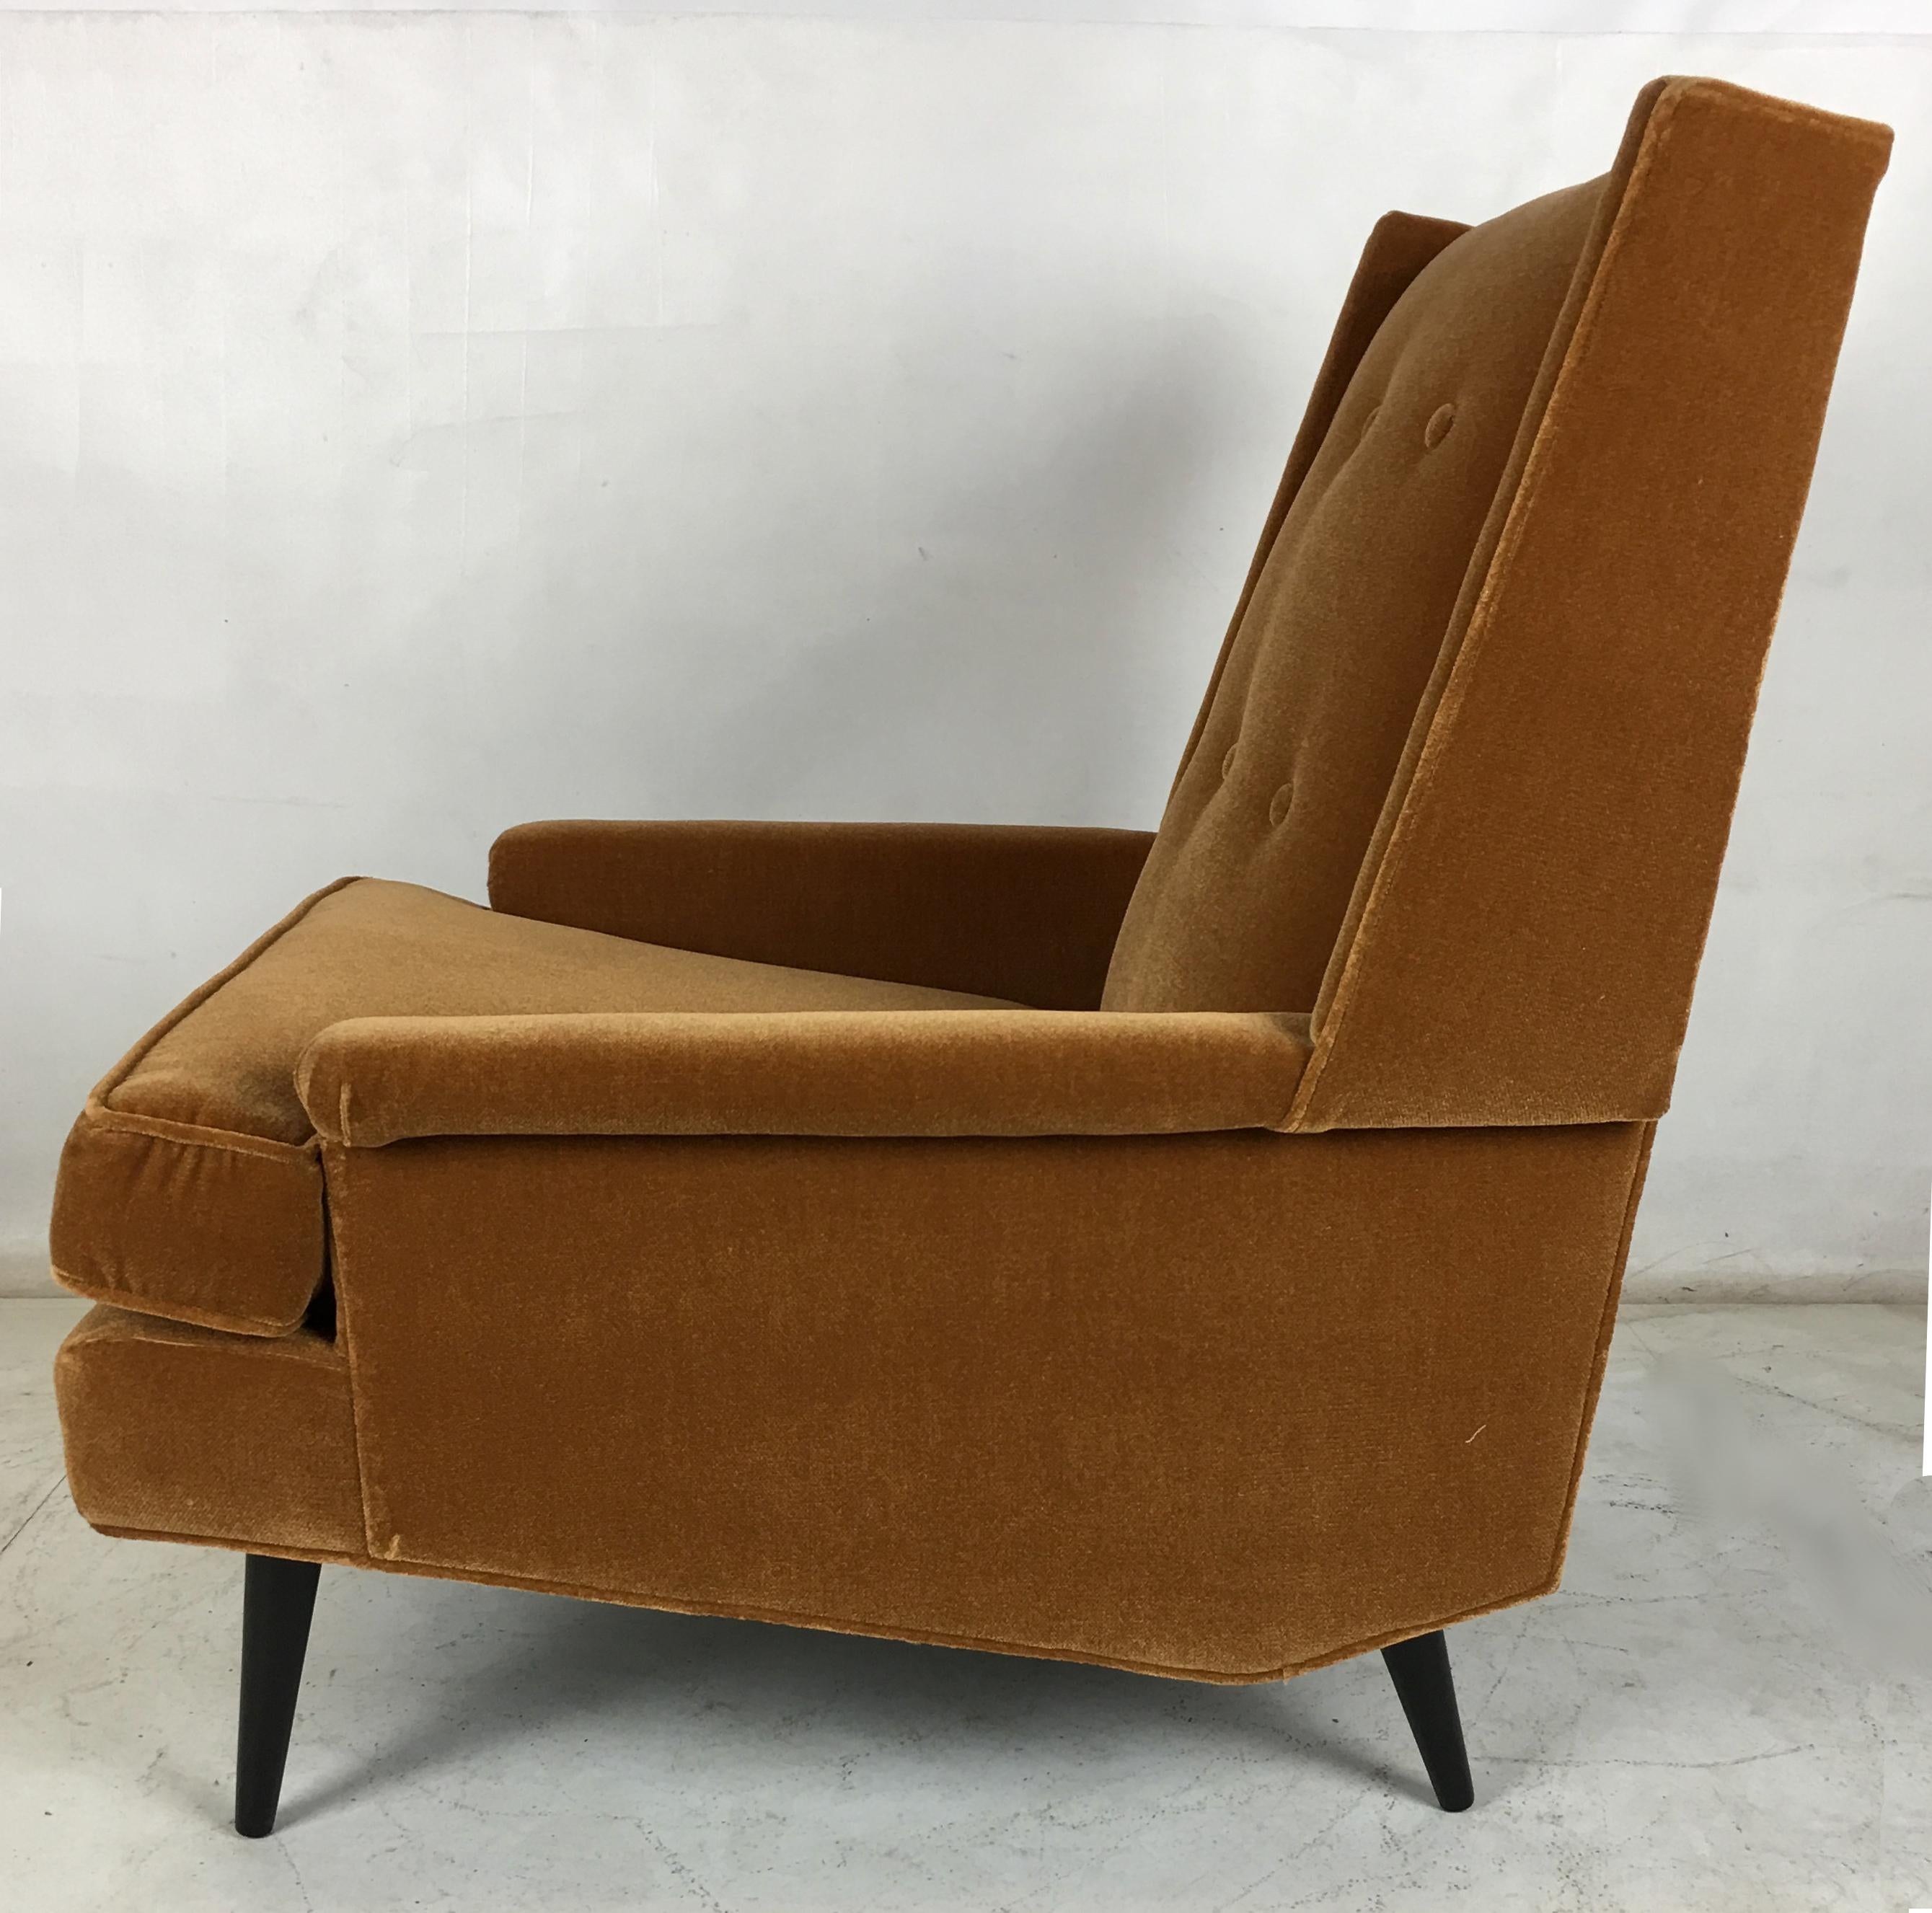 American Pair of Modernist Wing Chairs by Karpen of California